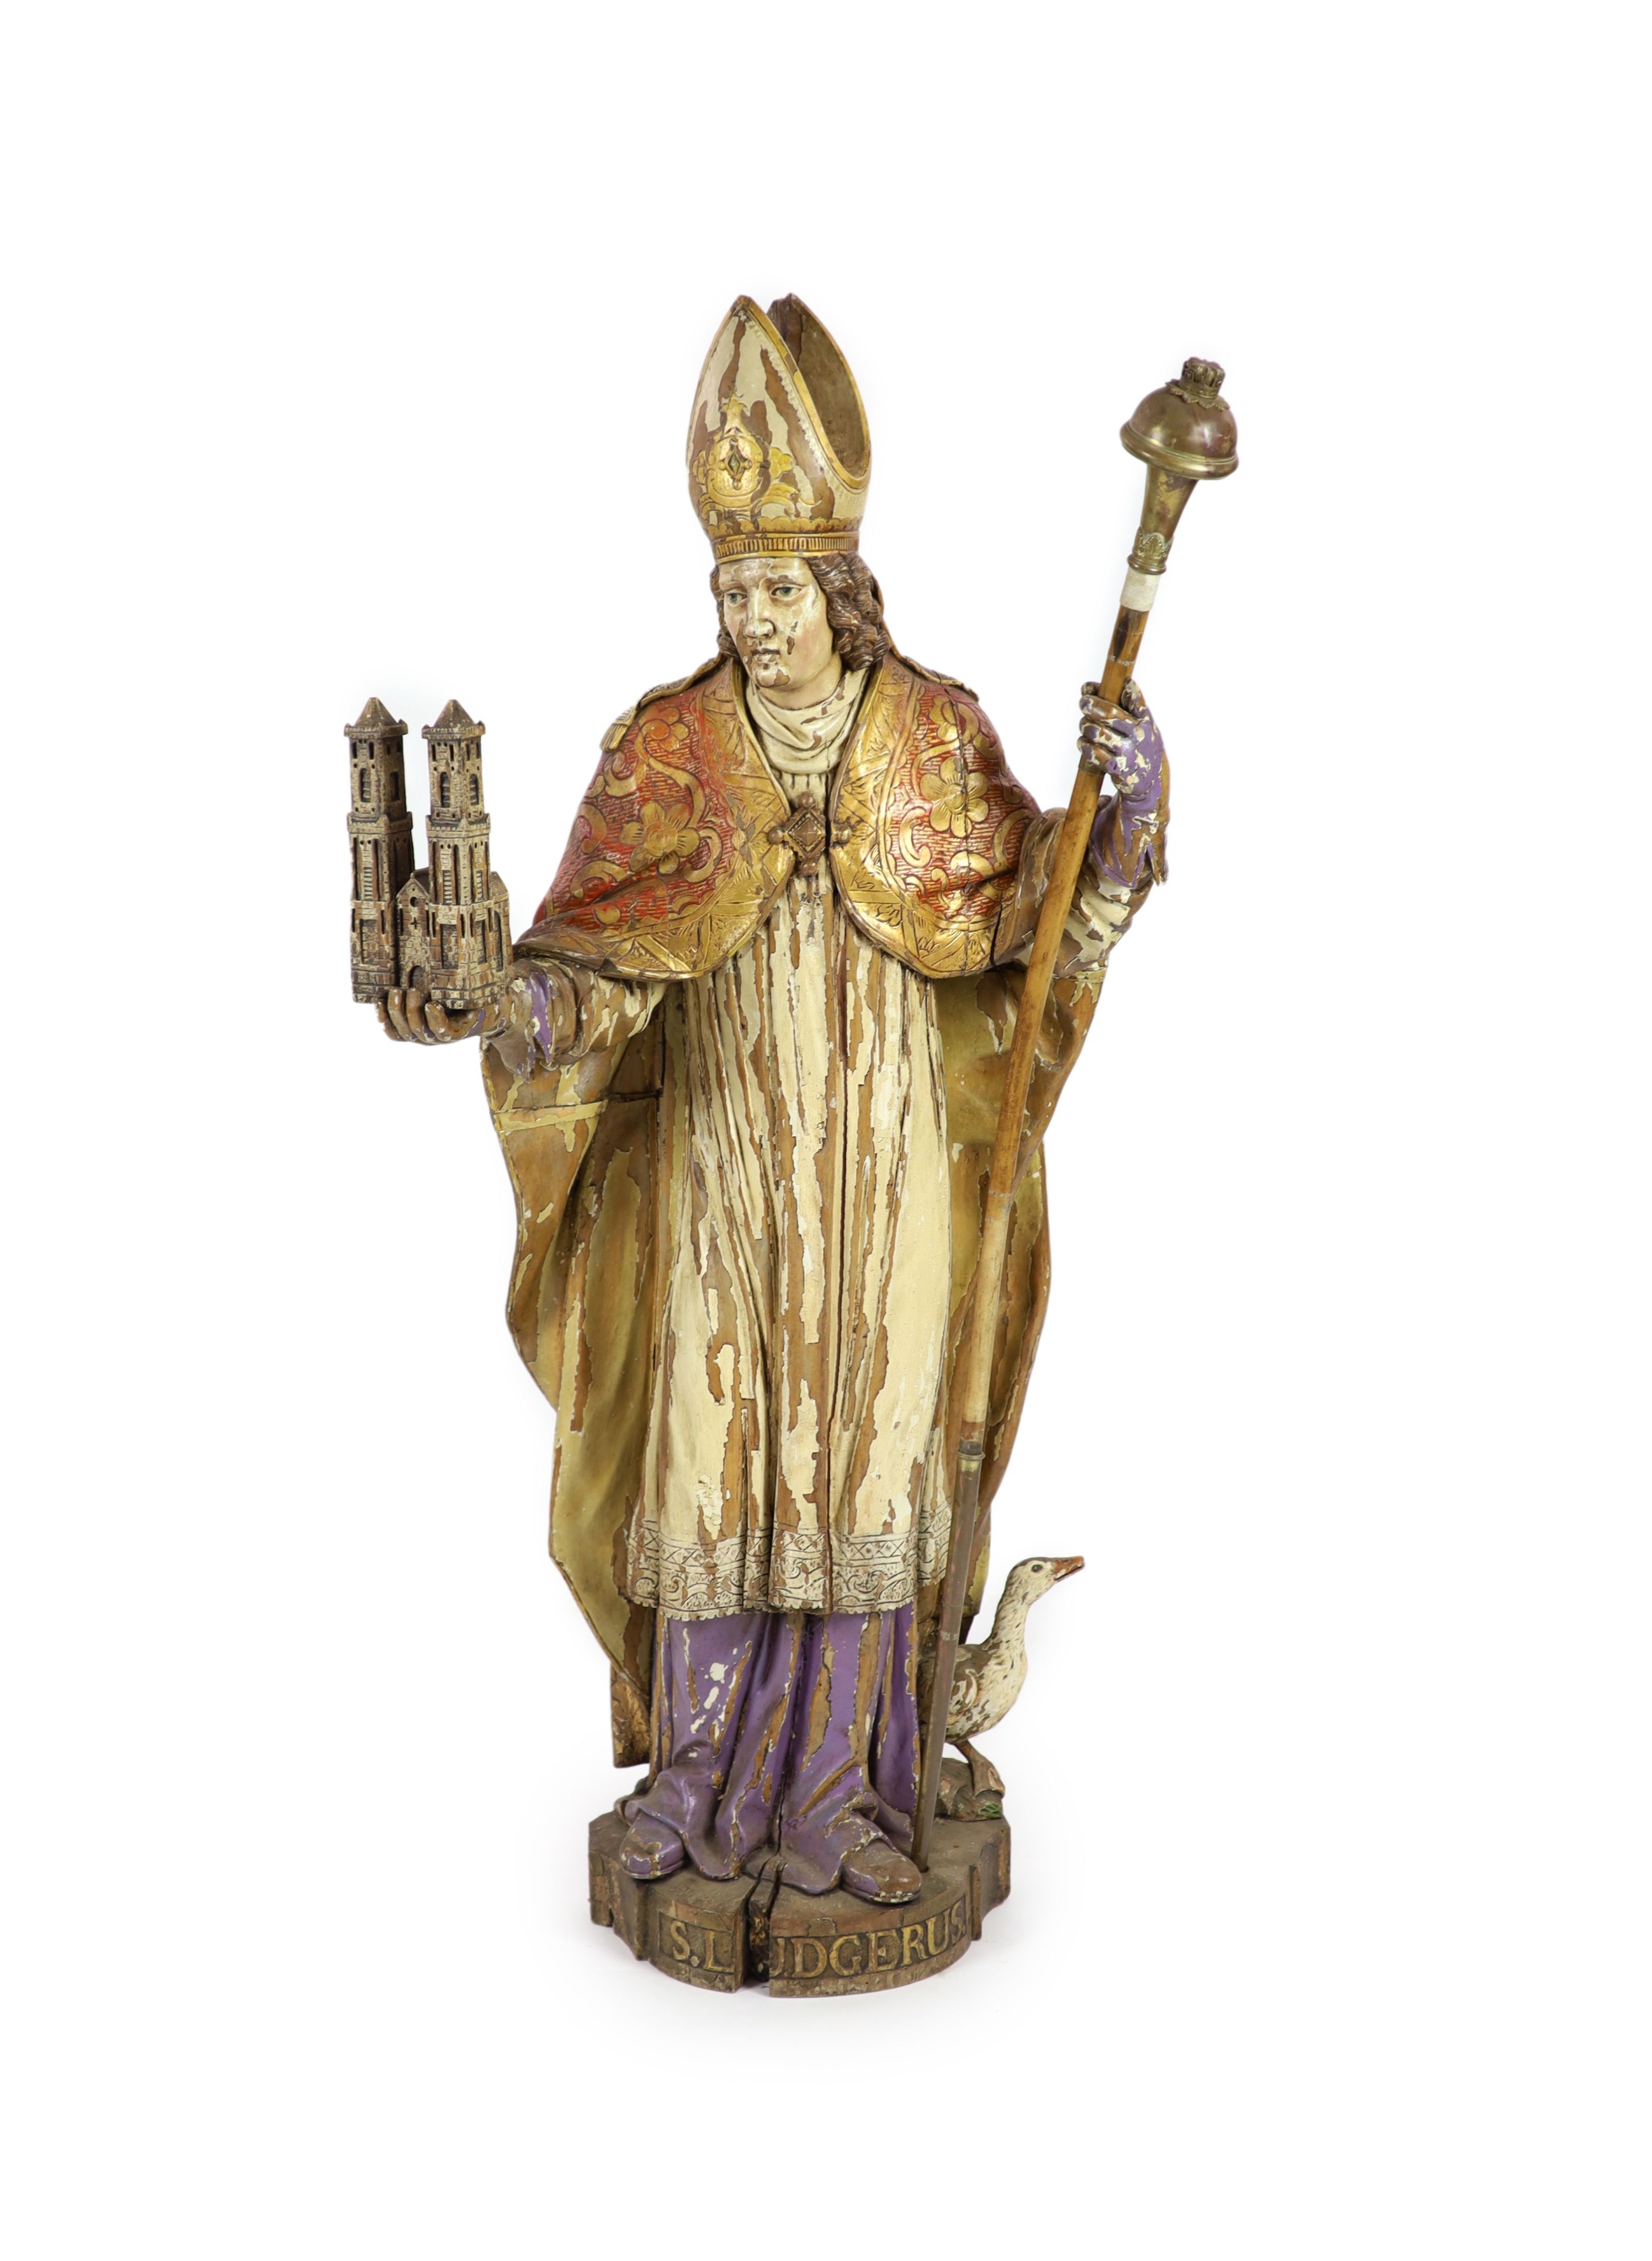 A 19th century German painted carved wood figure of St Ludgerus (b.742)standing holding a